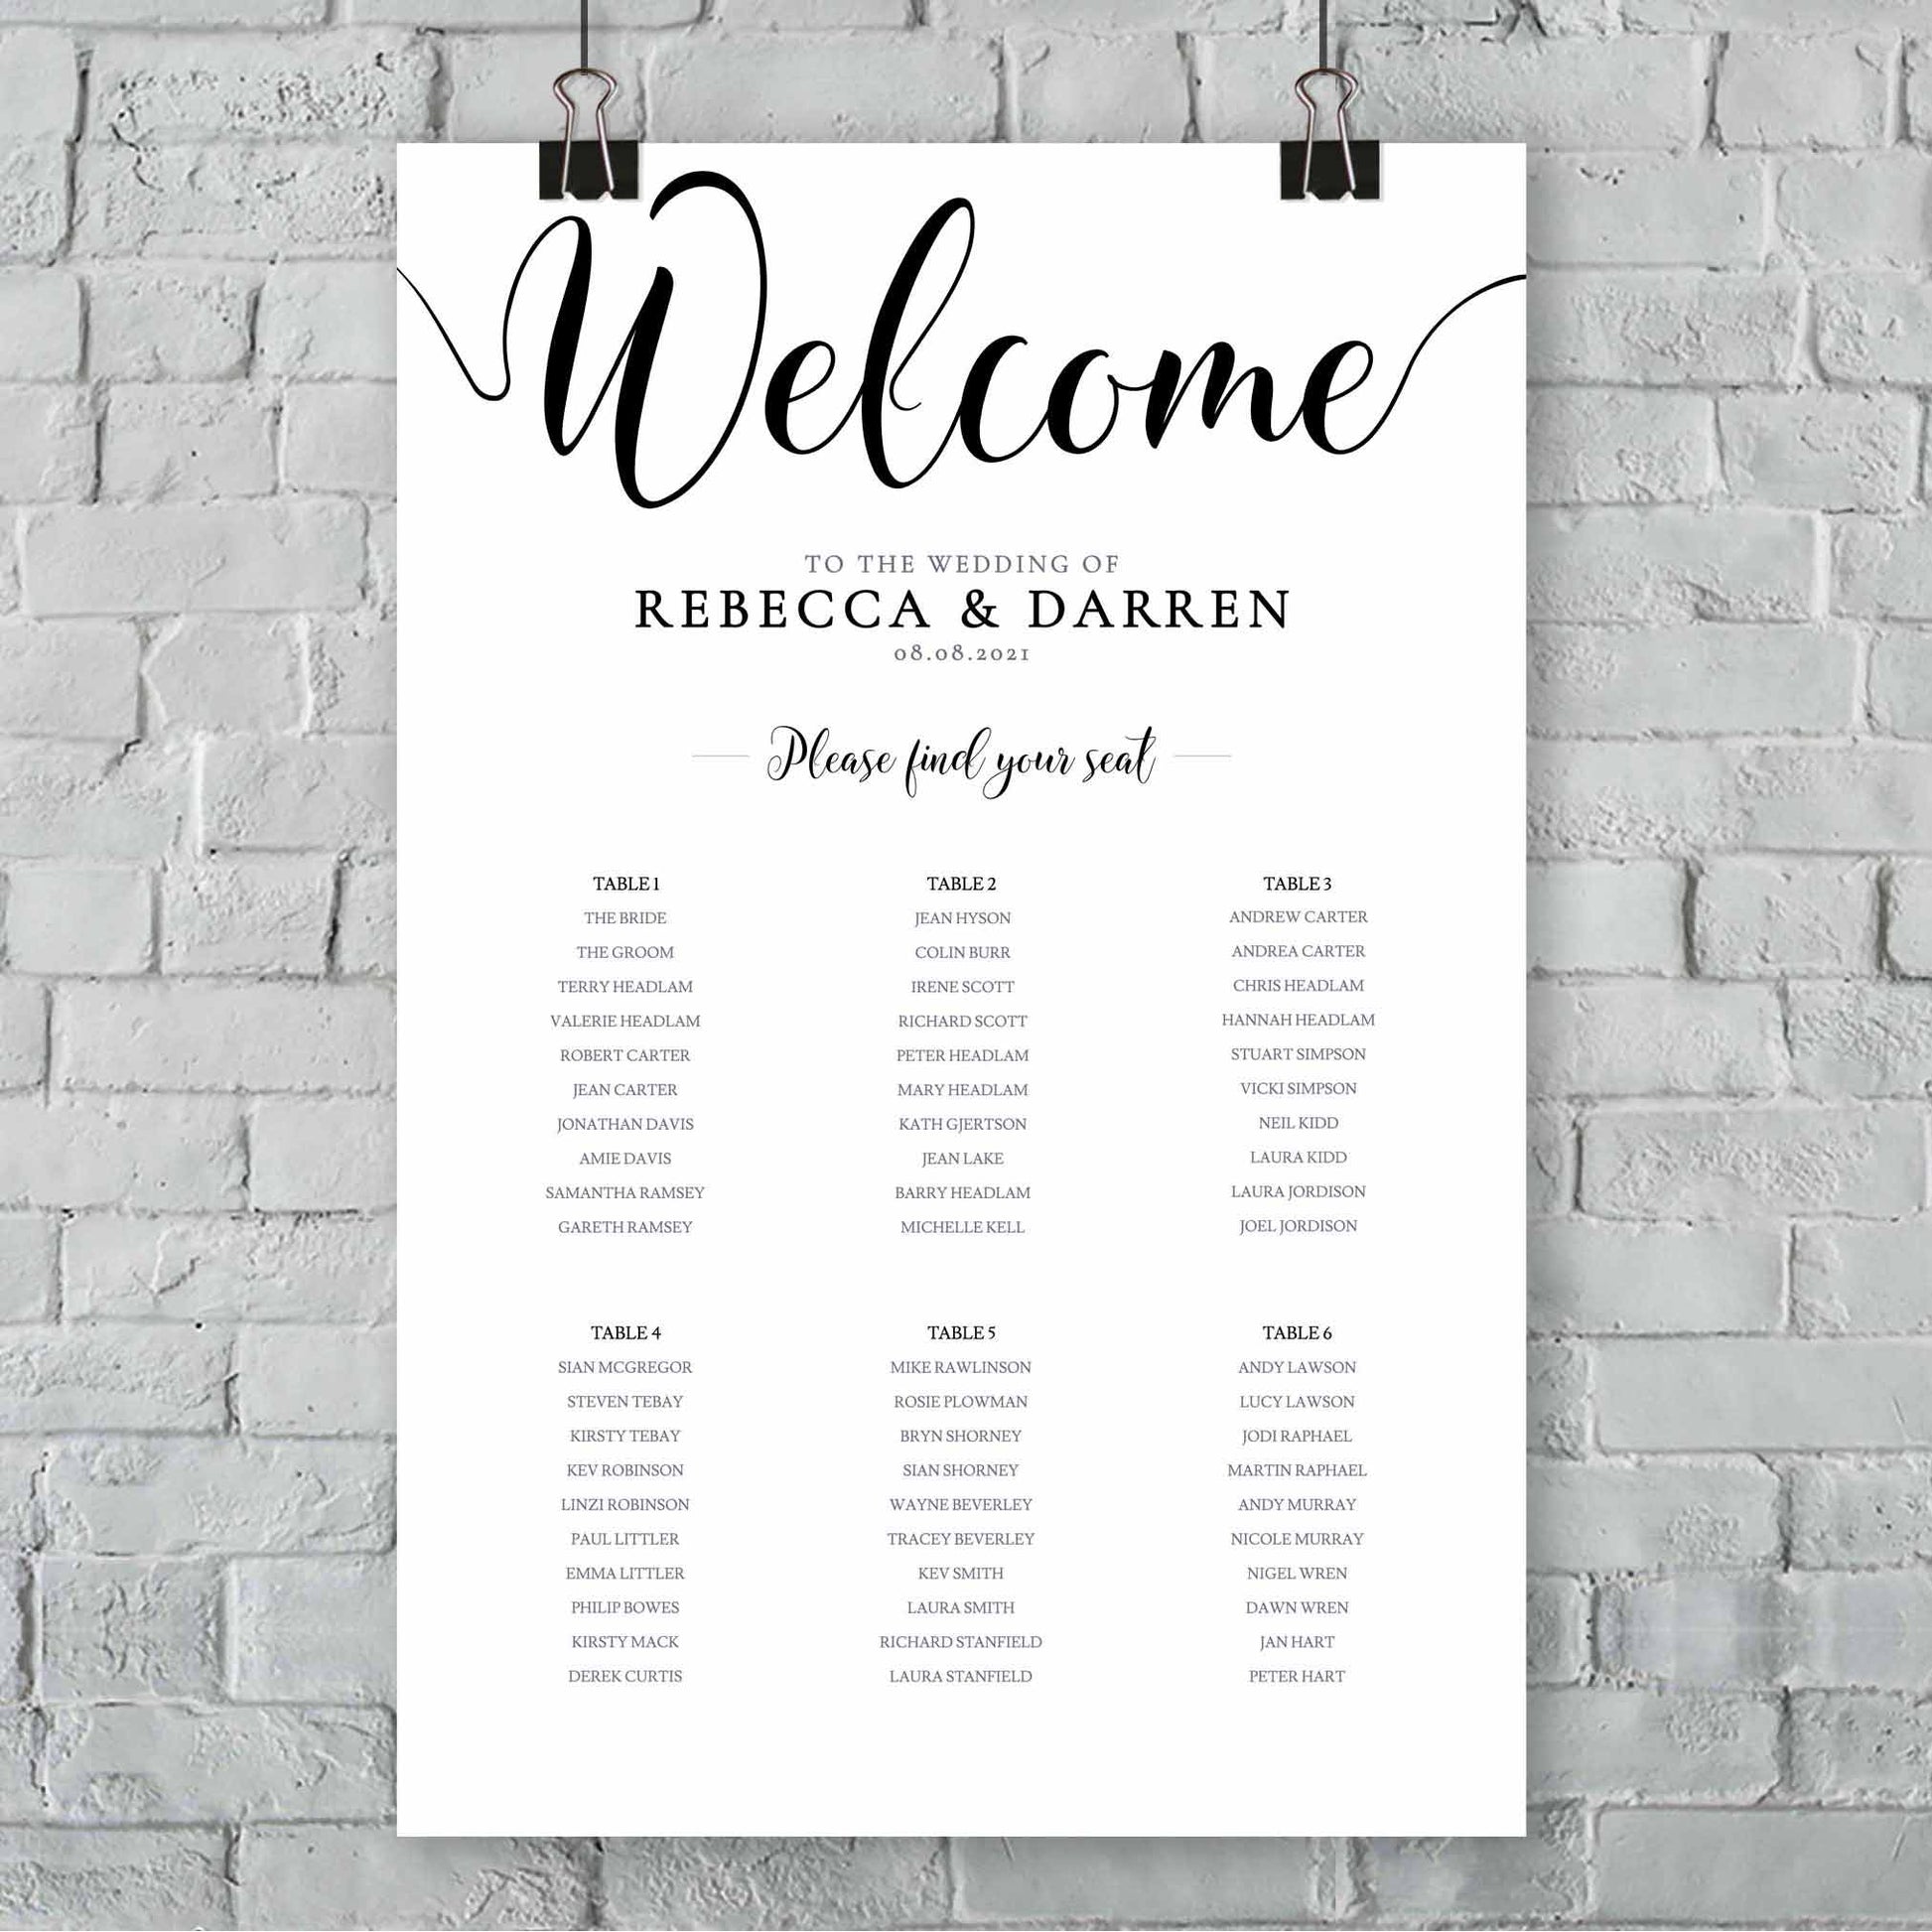 DIY wedding seating chart template with 6 tables